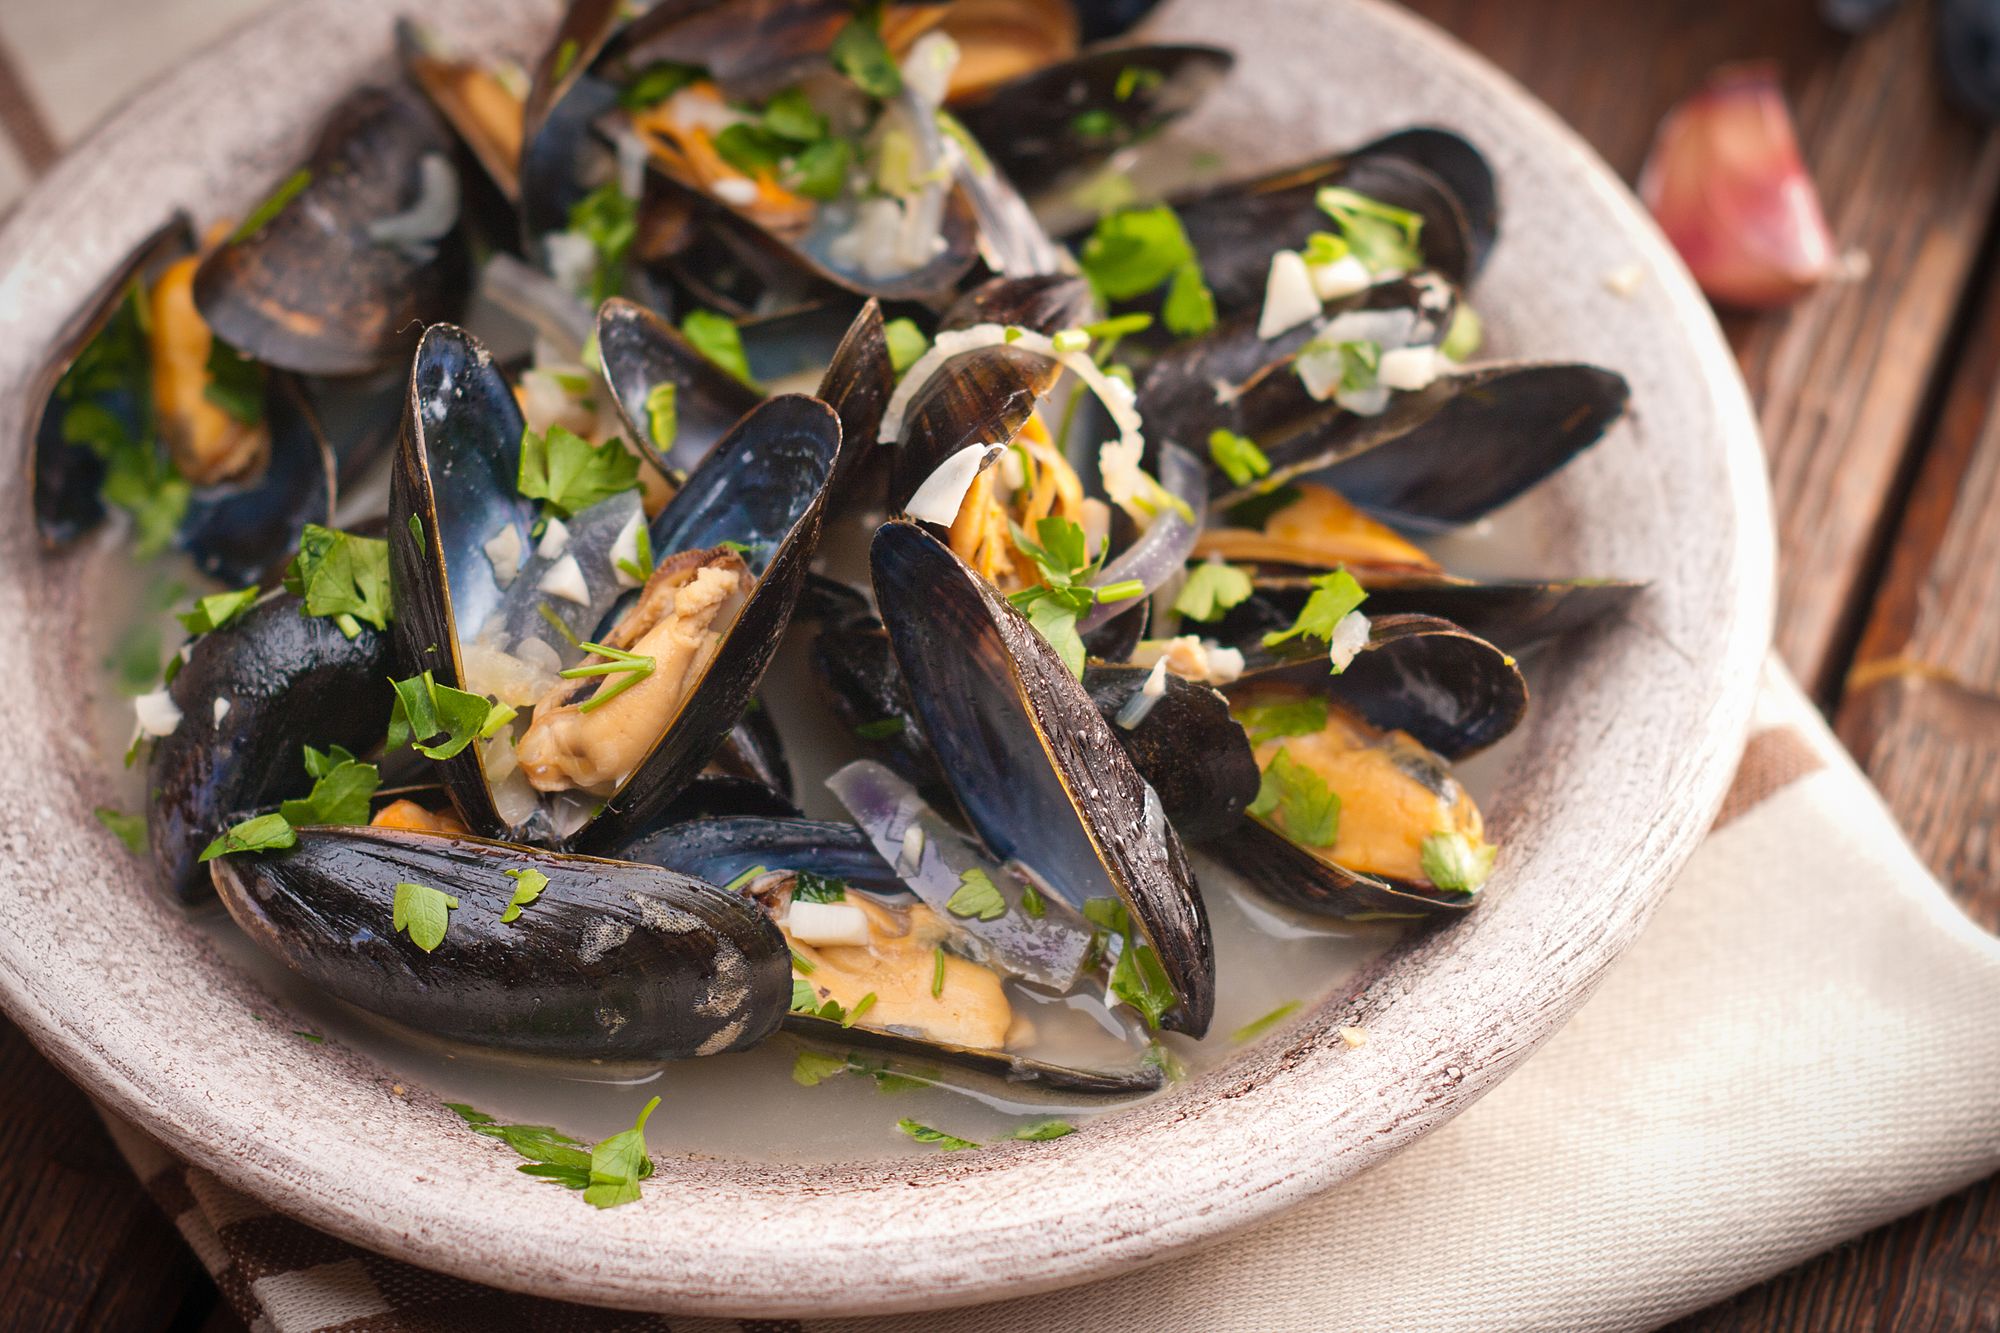 Roasted Mussels in Garlic Butter